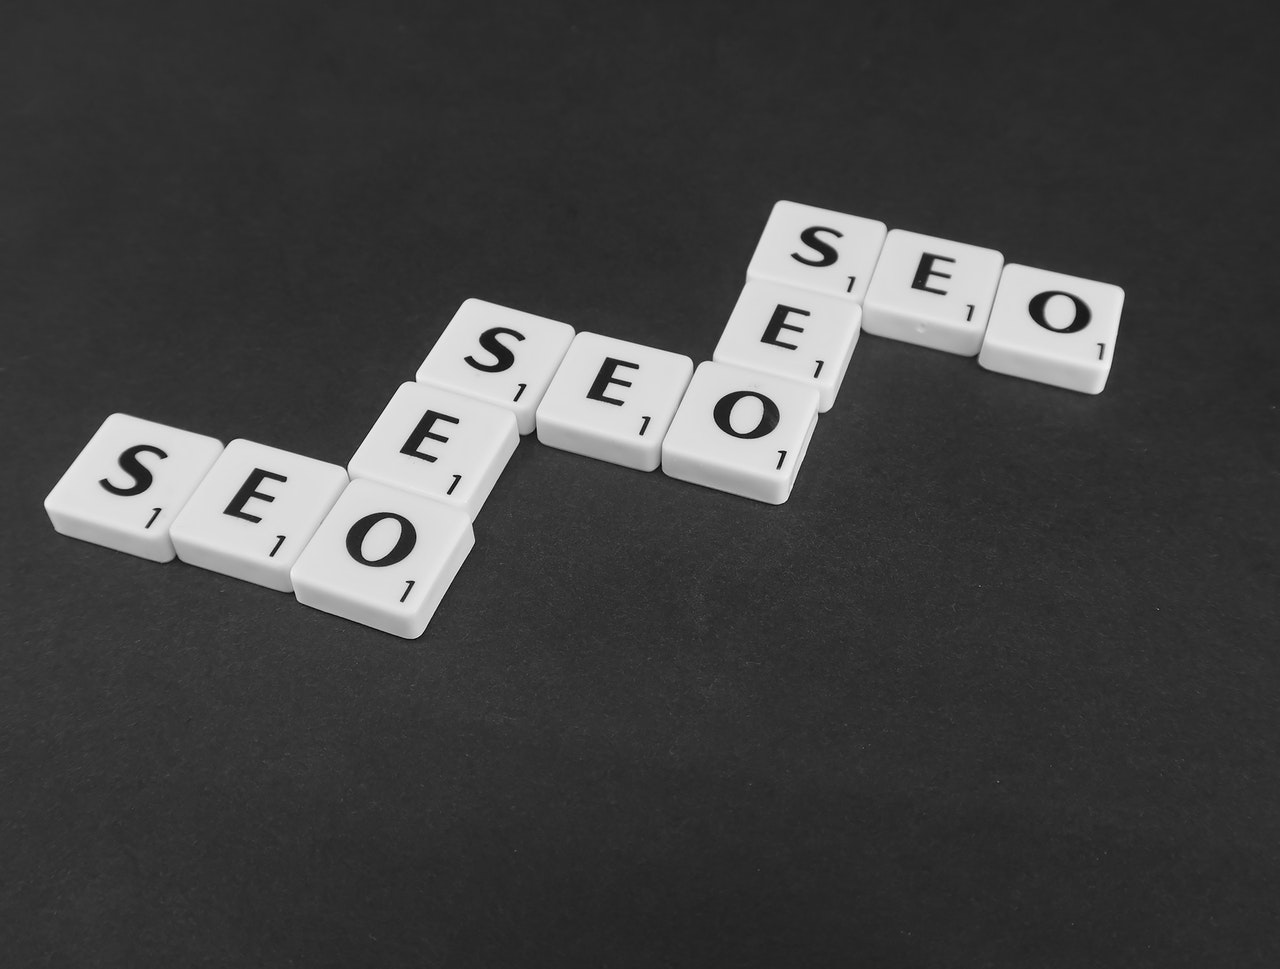 A Guide To SEO For Any Small Business